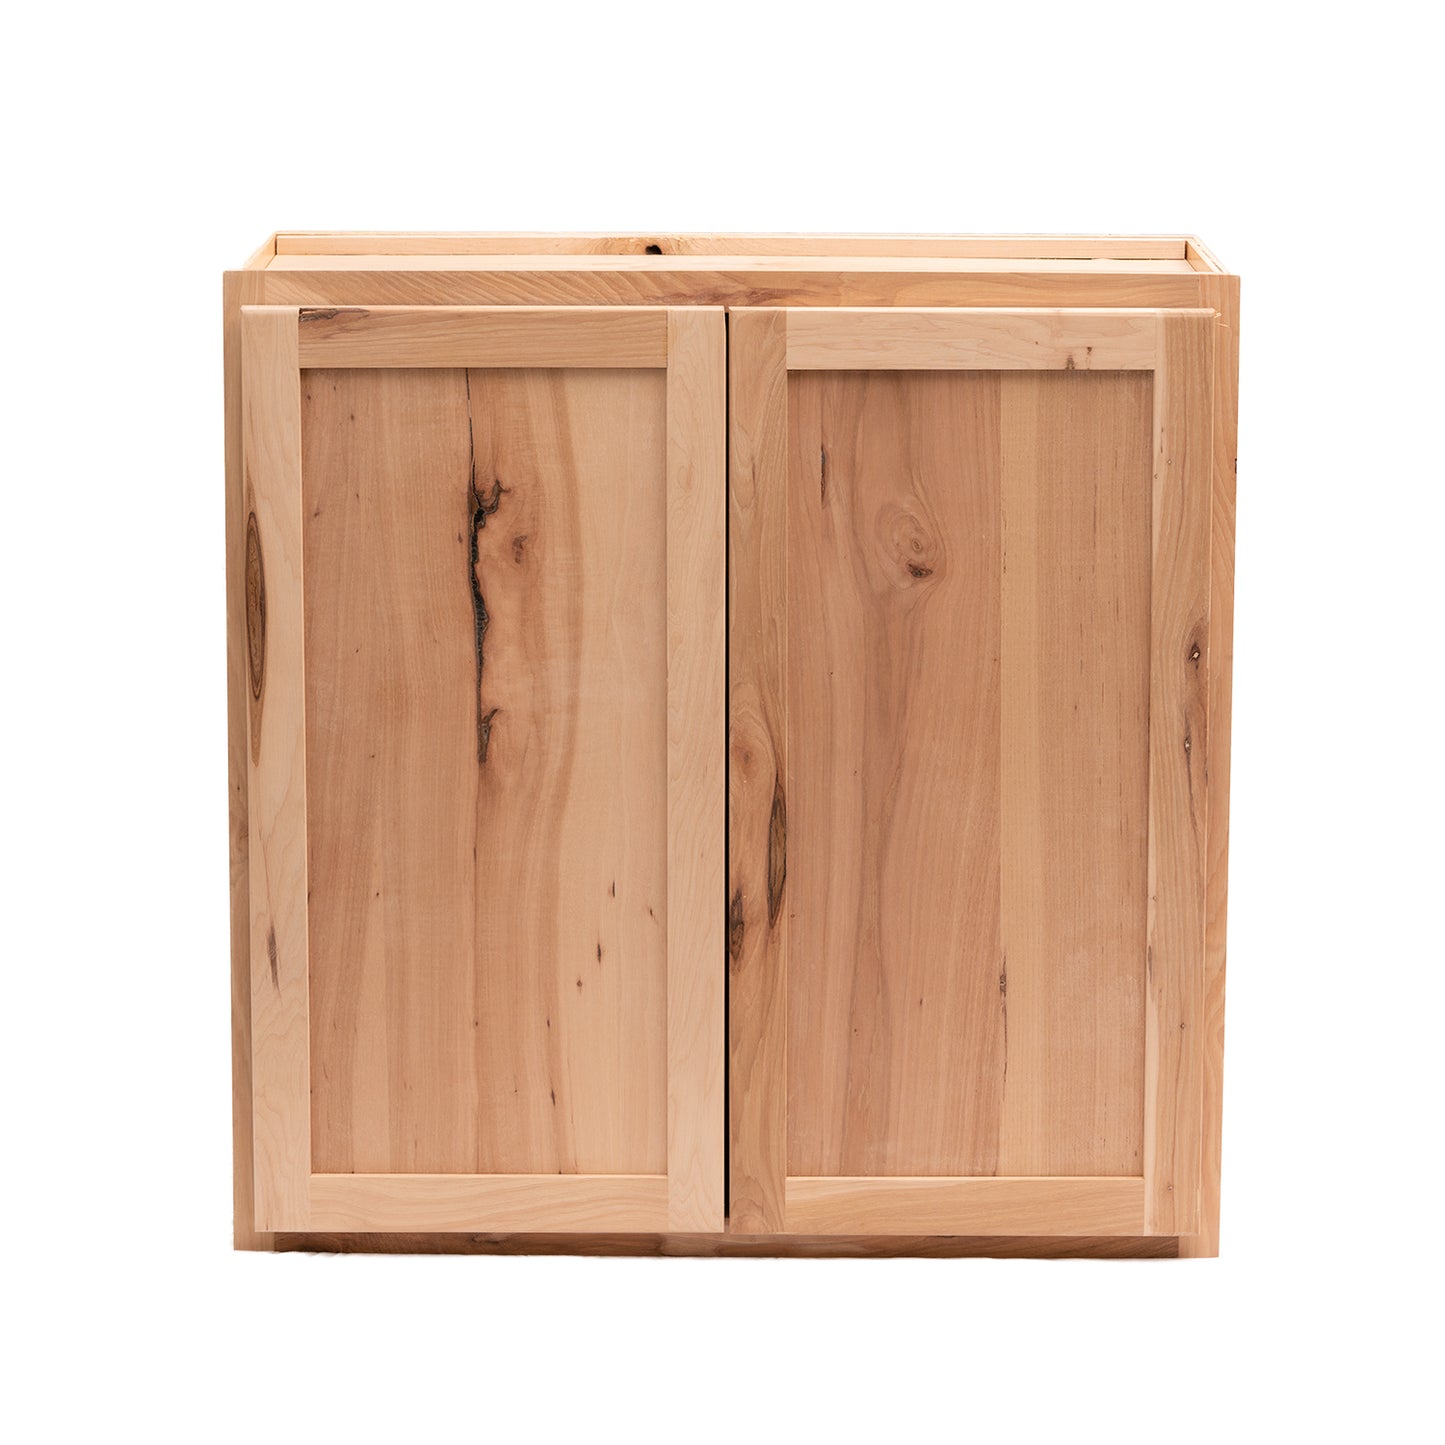 Quicklock RTA (Ready-to-Assemble) Raw Hickory 30"Wx30"Hx12"D Wall Cabinet